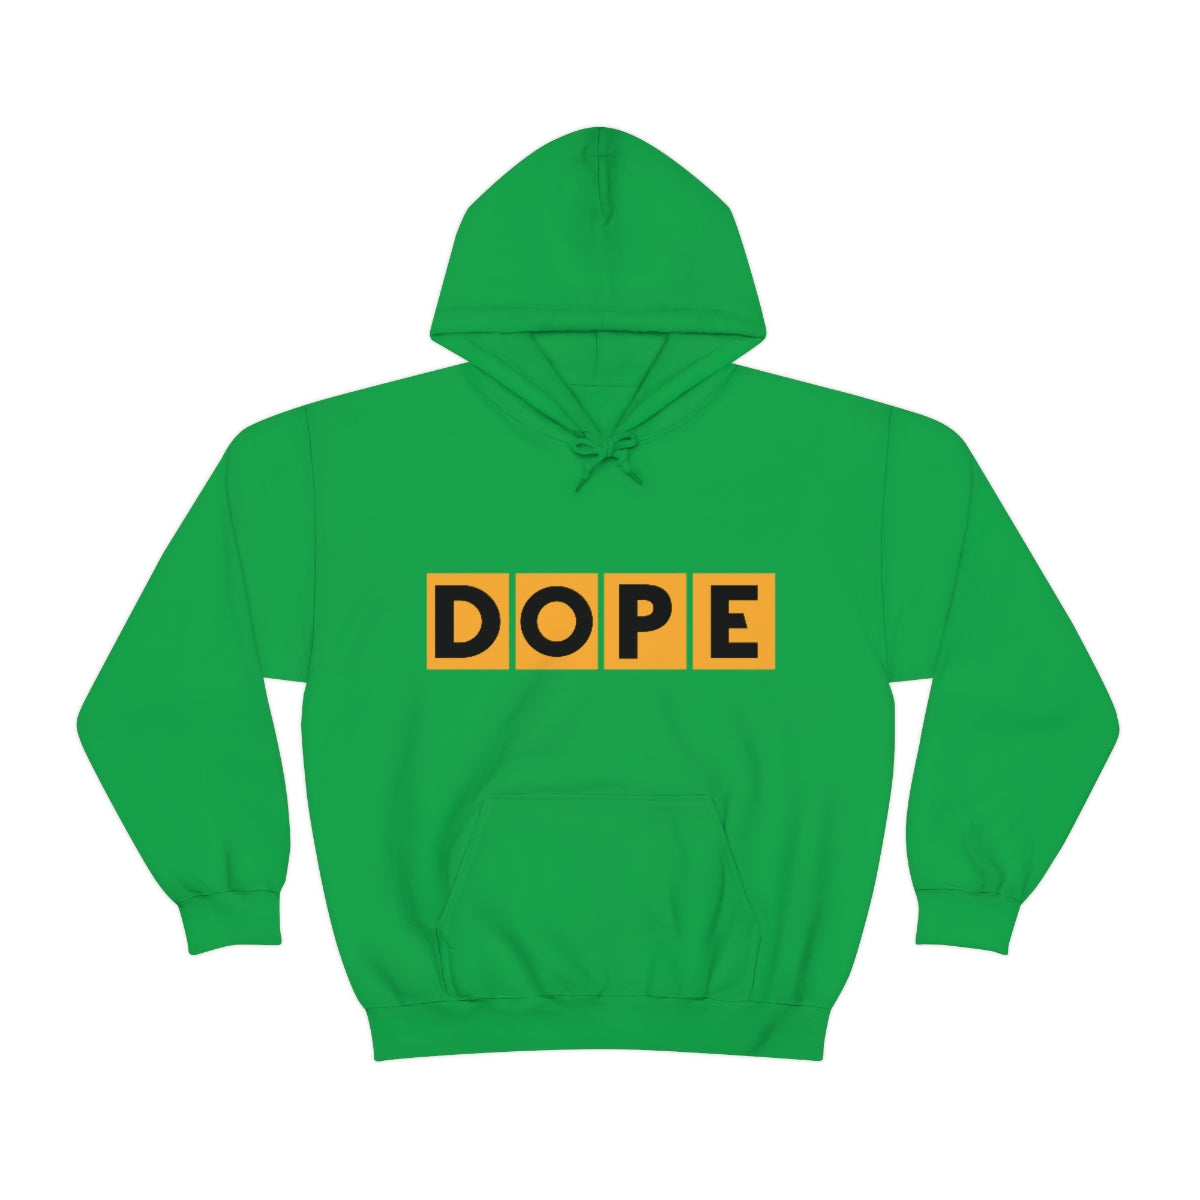 "Dope" Hoodie (Available in Multiple Colors)